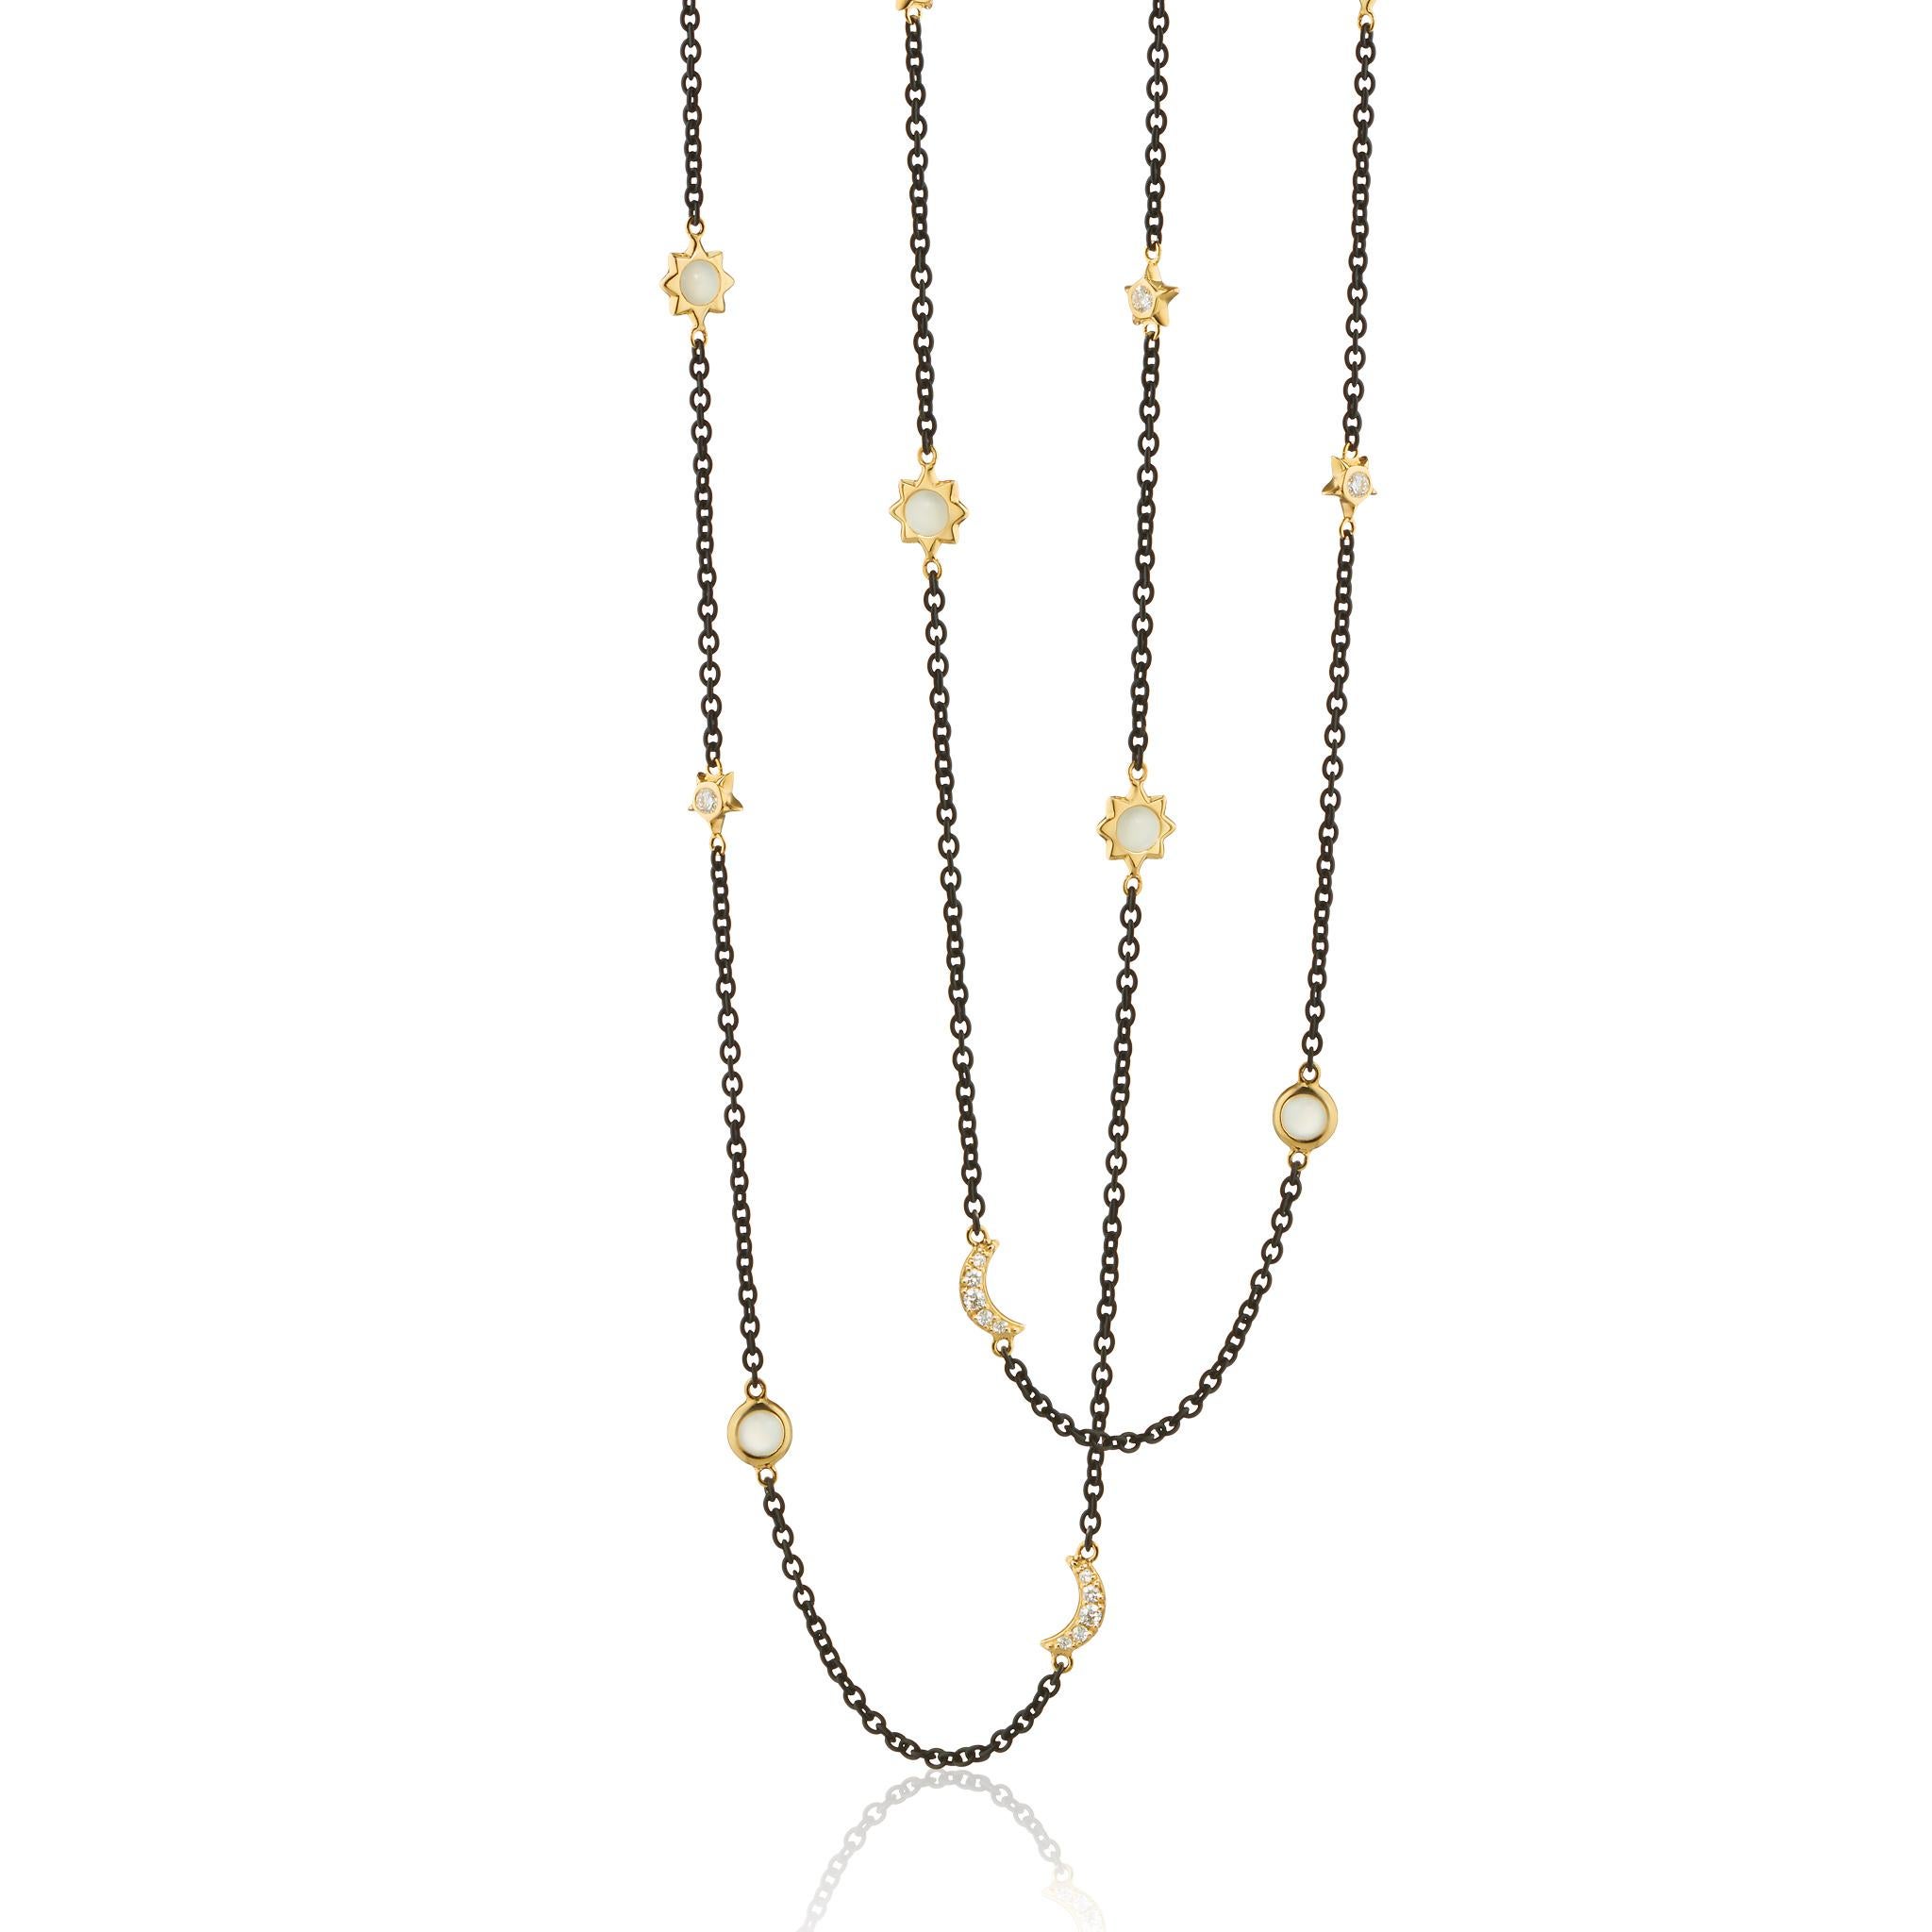 From the Sun, Moon and Stars Collection, this black steel chain necklace inspires the mystical quality of space by featuring (5) each of the following accents in 18K yellow gold - diamond moons, bezel set moonstone suns and bezel set diamond stars.